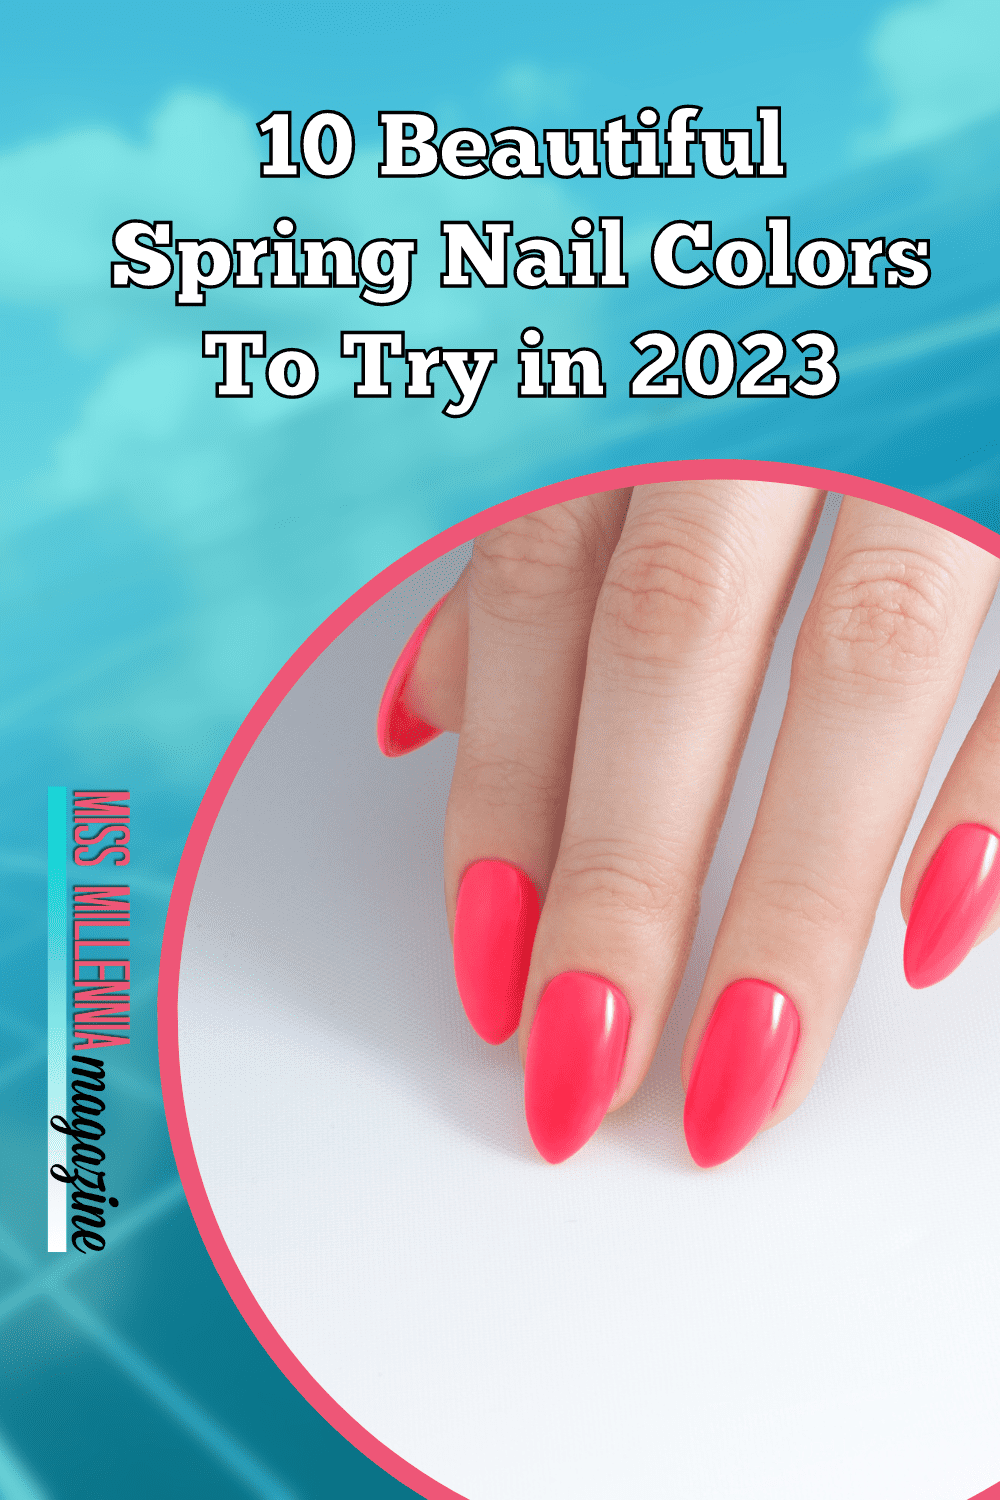 10 Beautiful Spring Nail Colors To Try in 2023